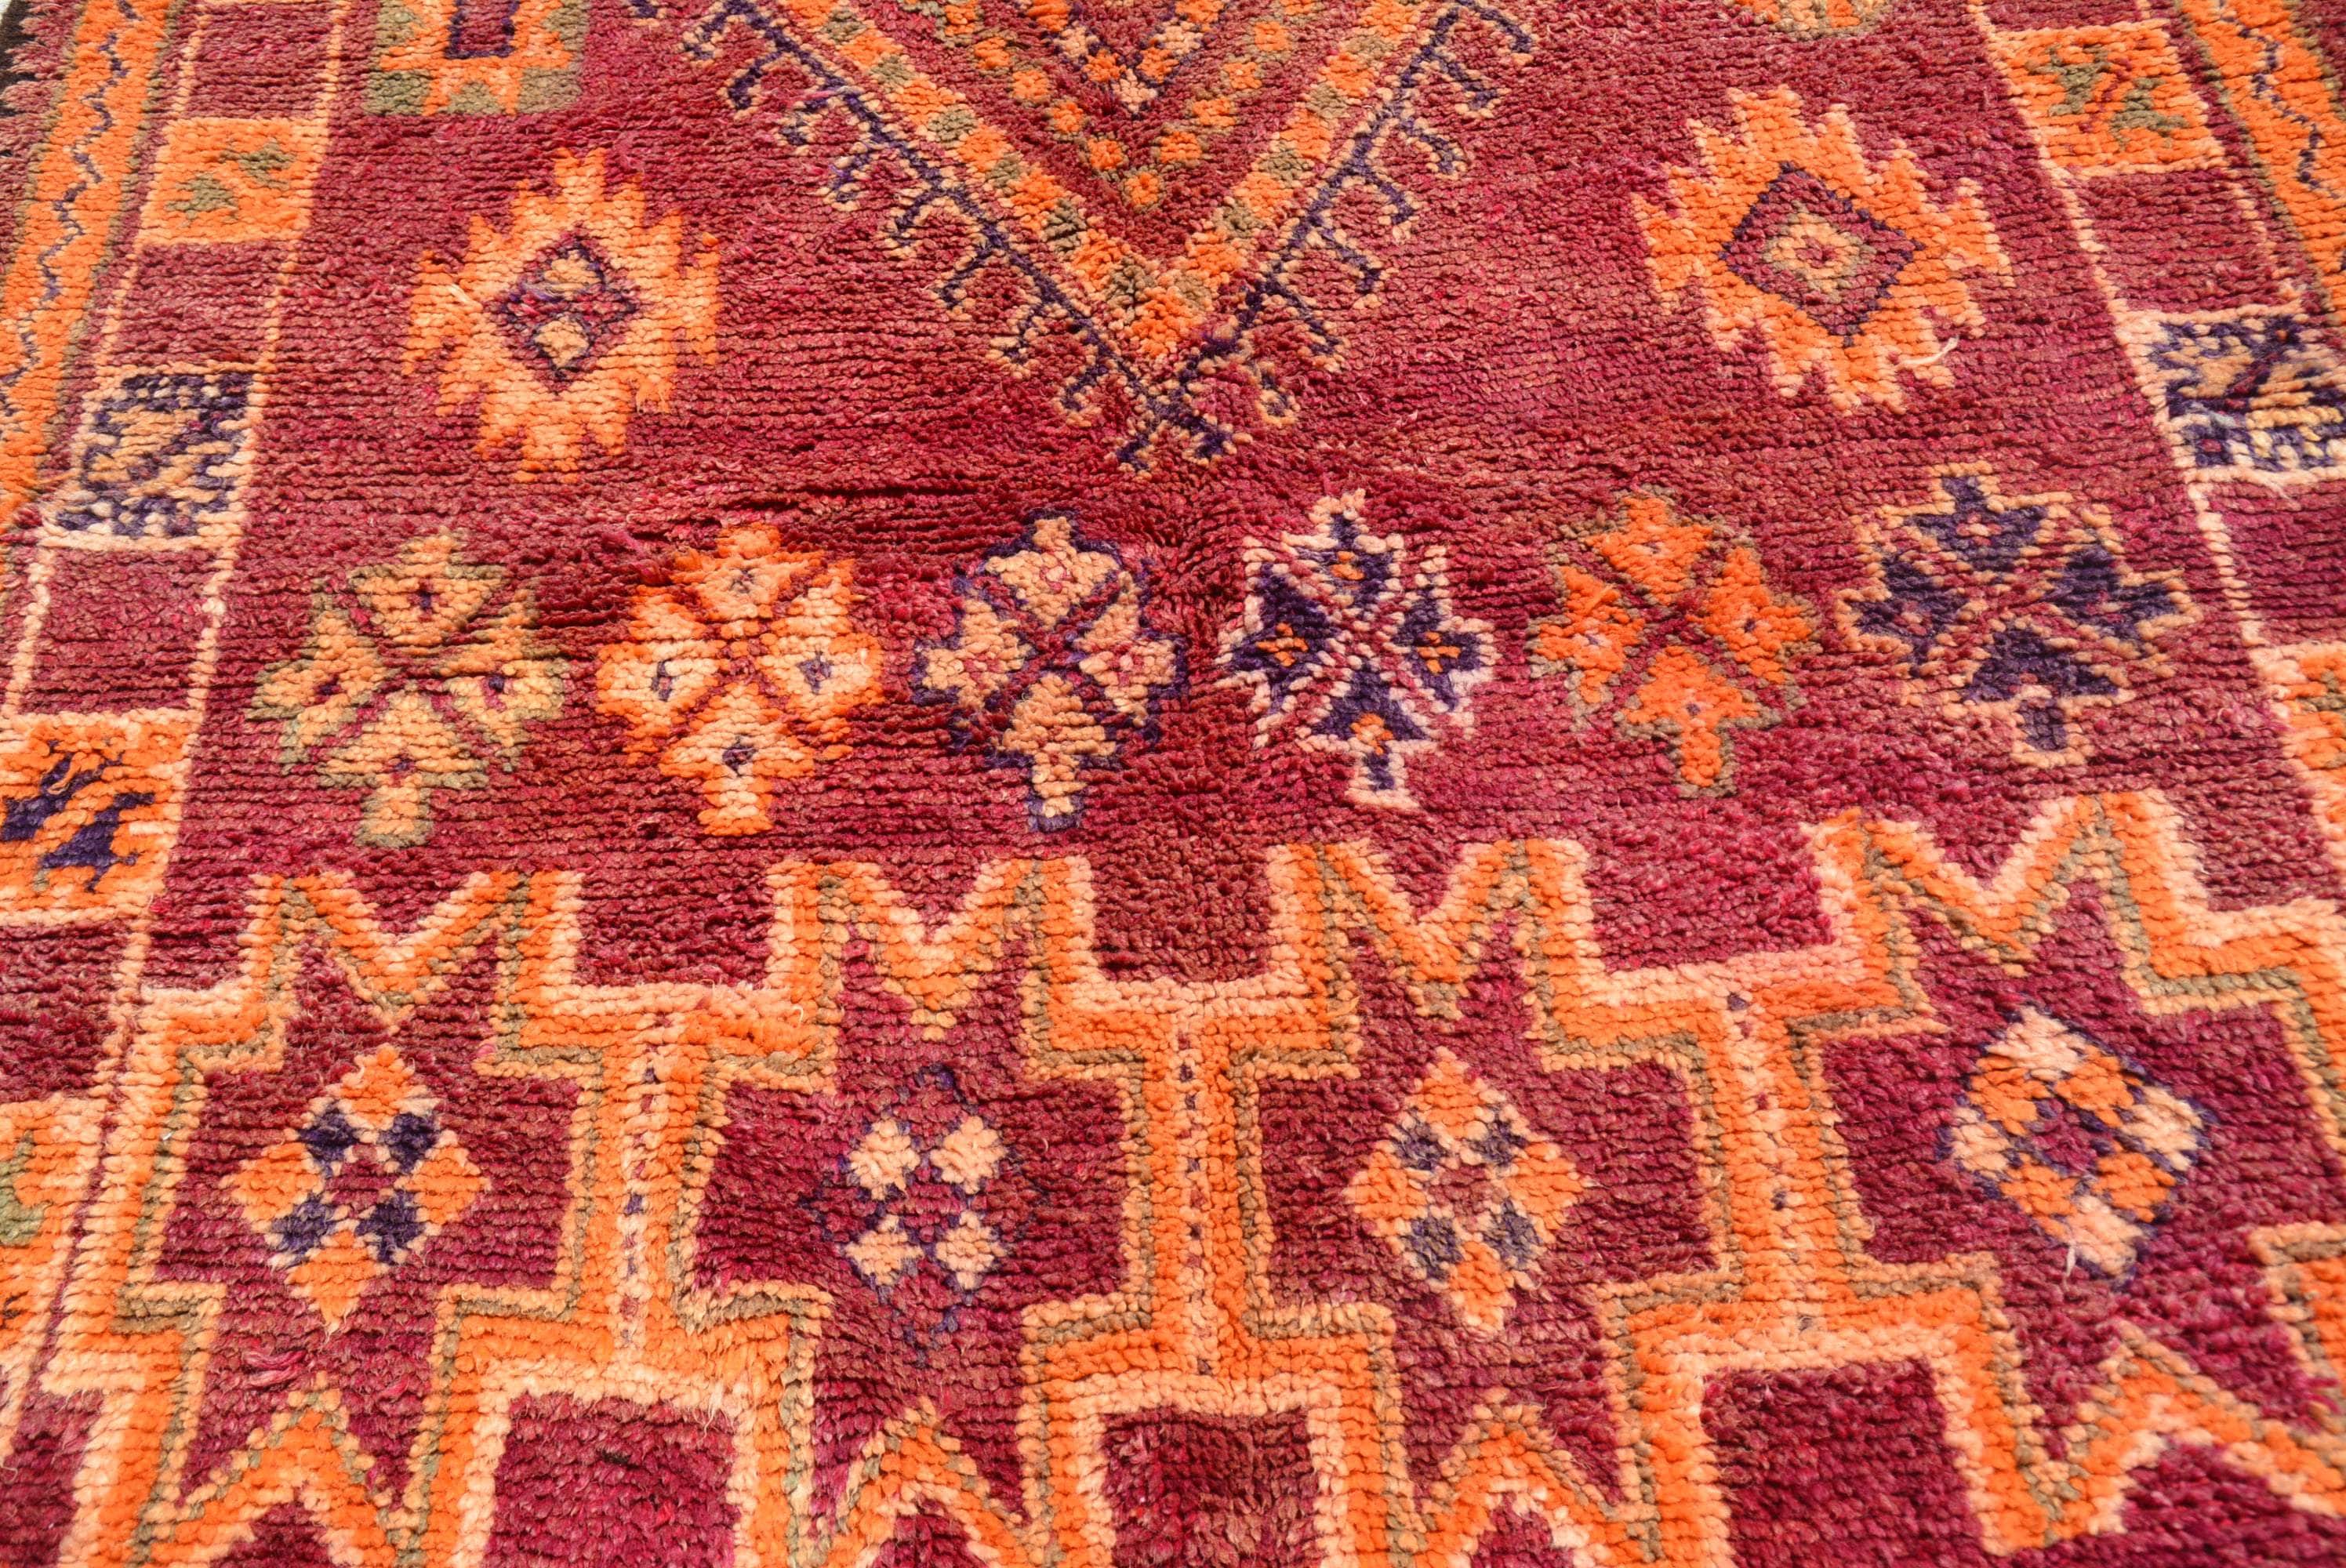 Vintage Moroccan Rug Vintage Oasis | Handmade Moroccan Rug with Intricate Patterns illuminate collective